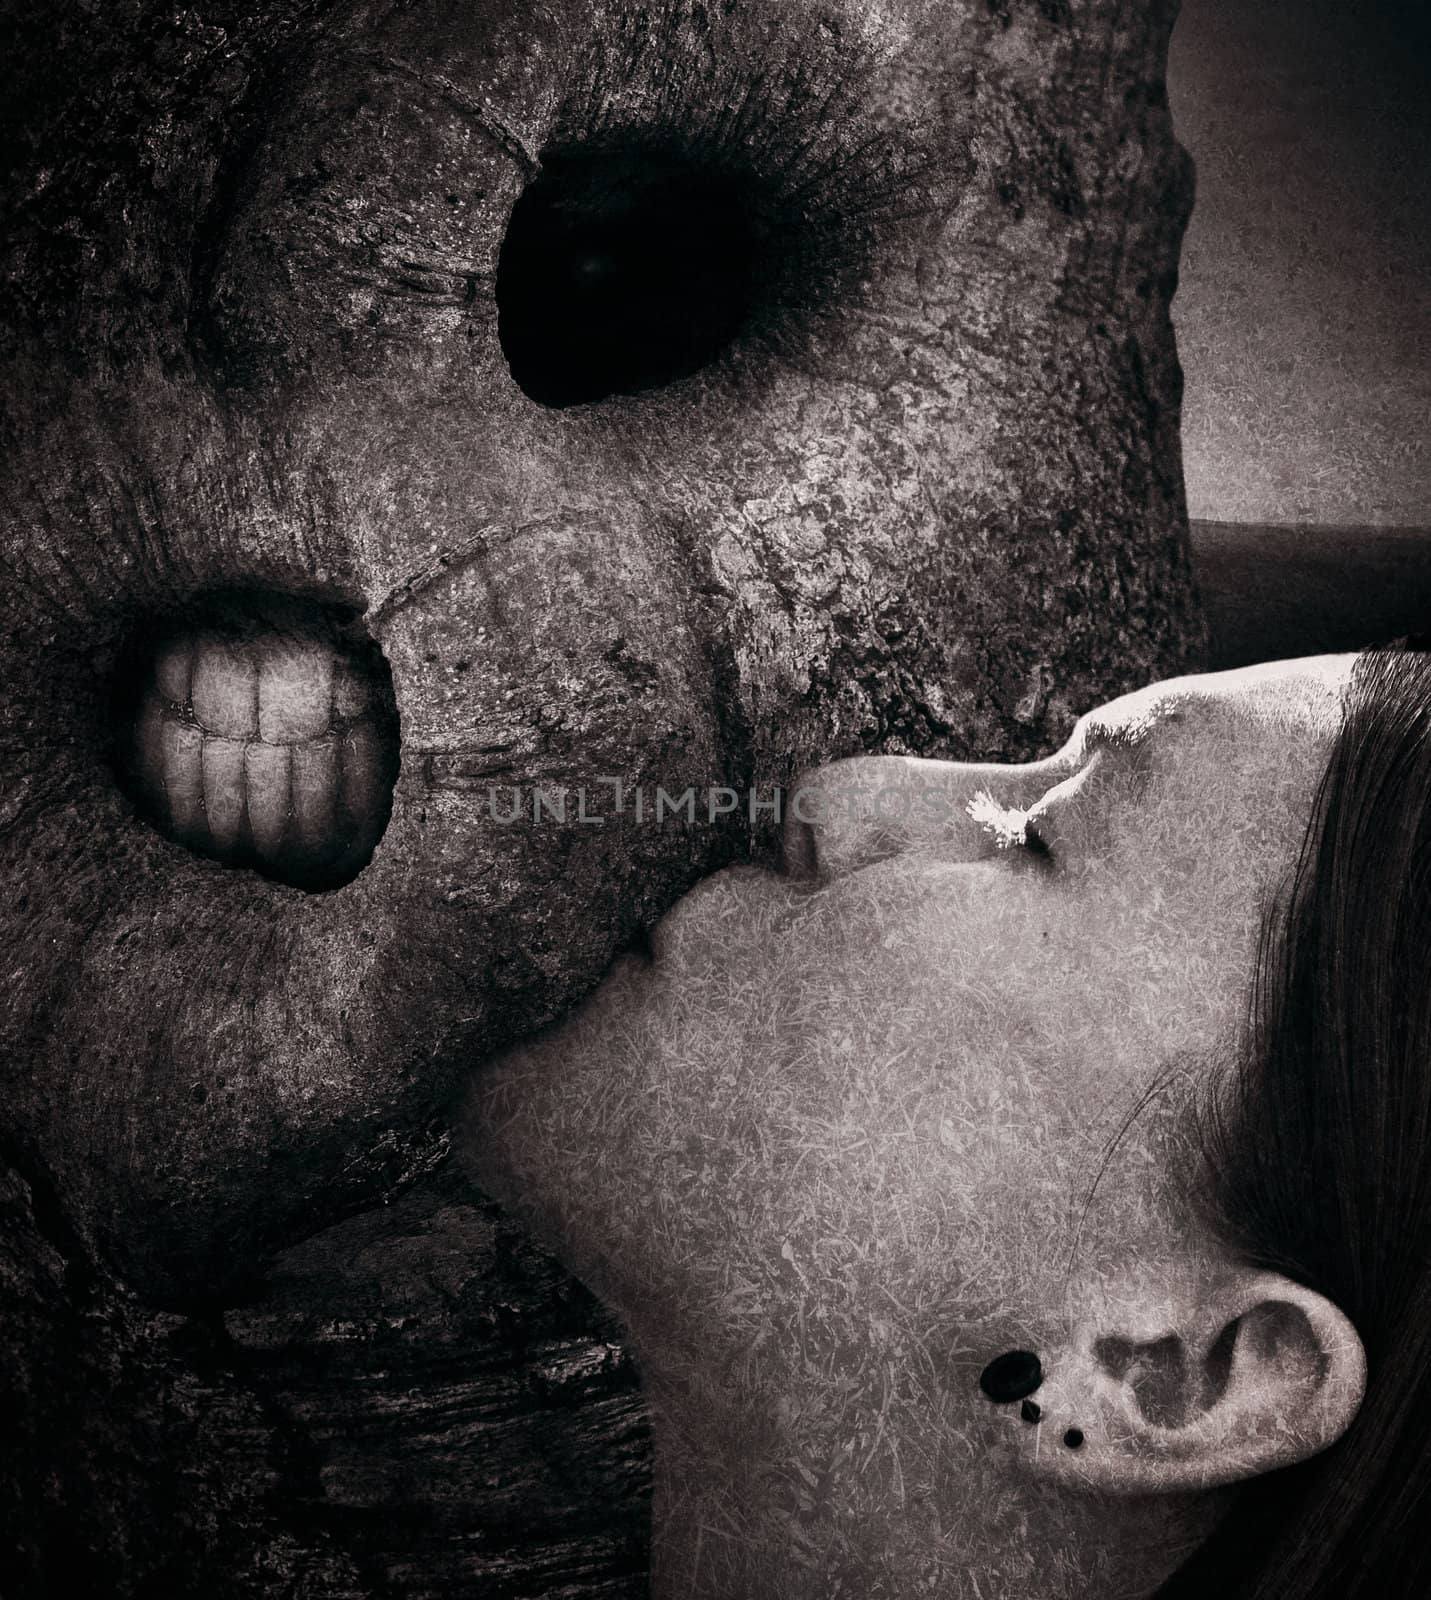 Concept digital art for a book cover (conceptual art) with a beautiful girl kissing a horrifying nature monstrosity. by domencolja